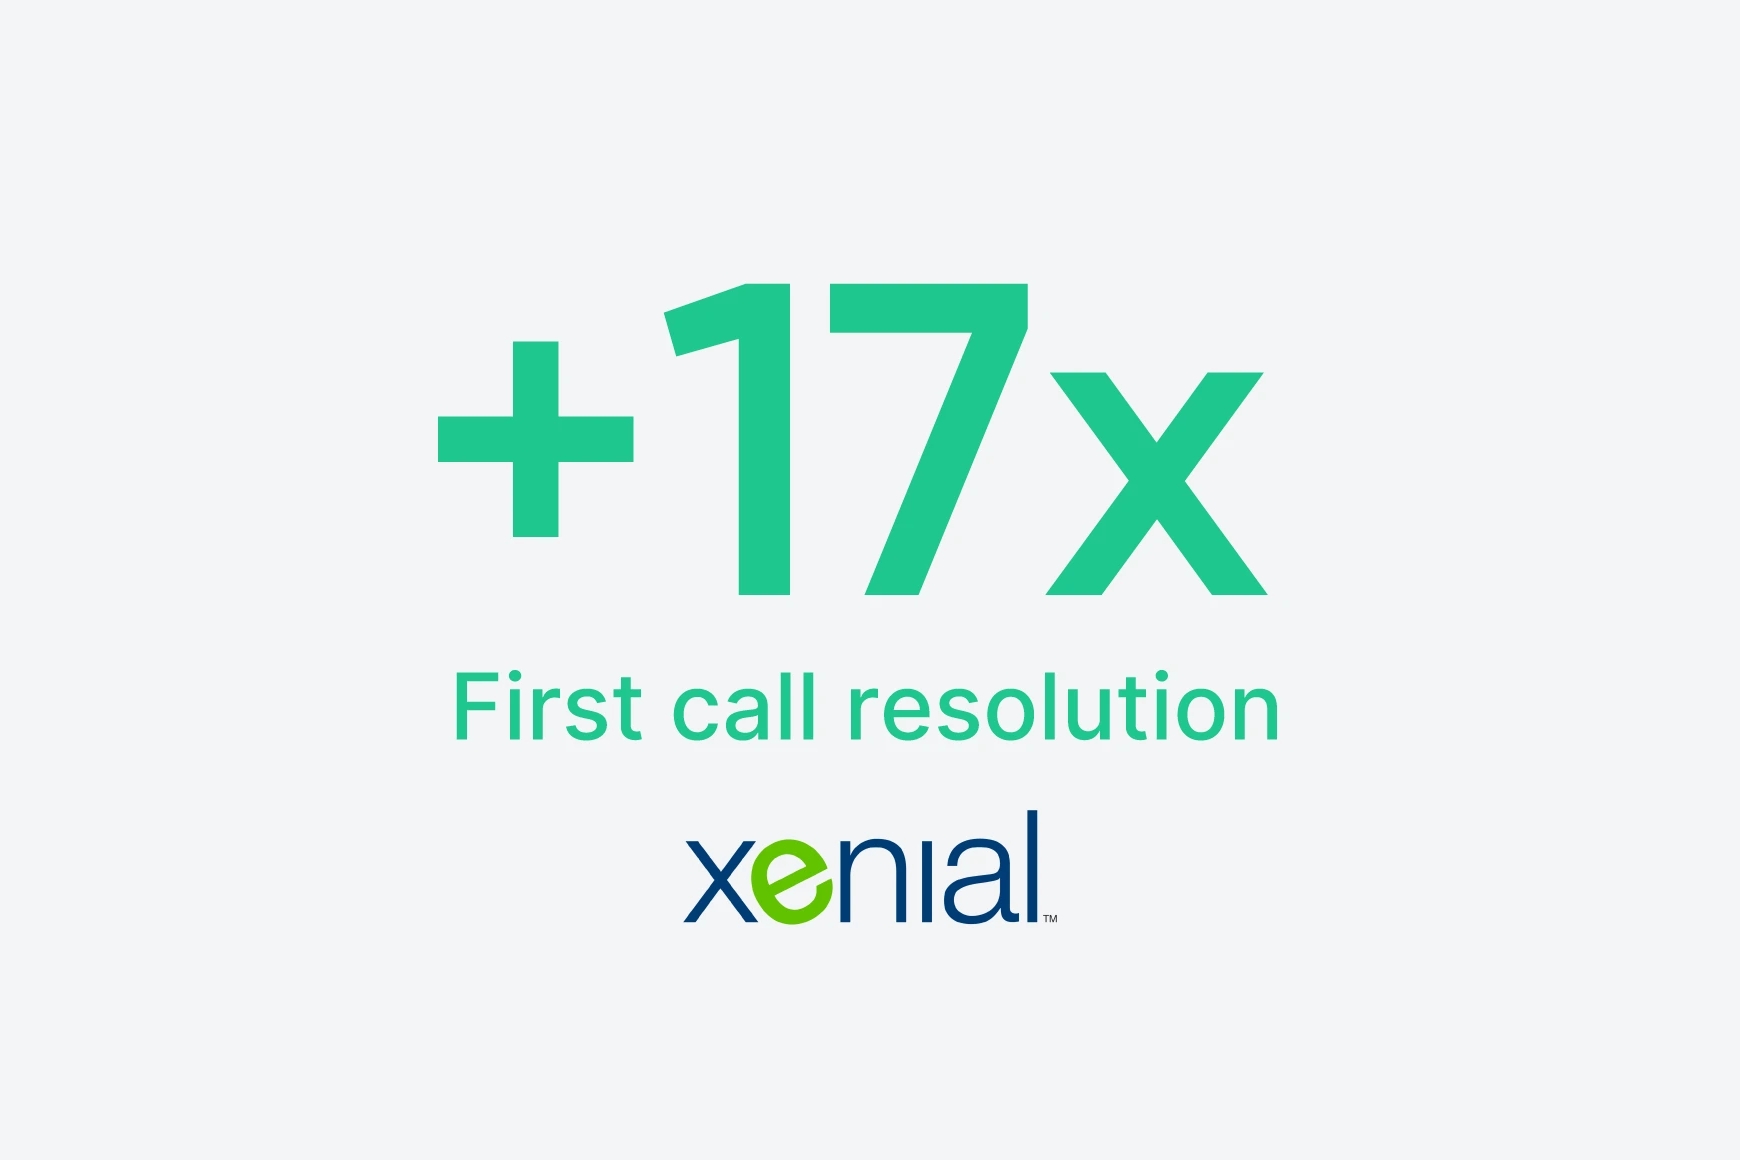 Xenial increased first call resolution by 17x